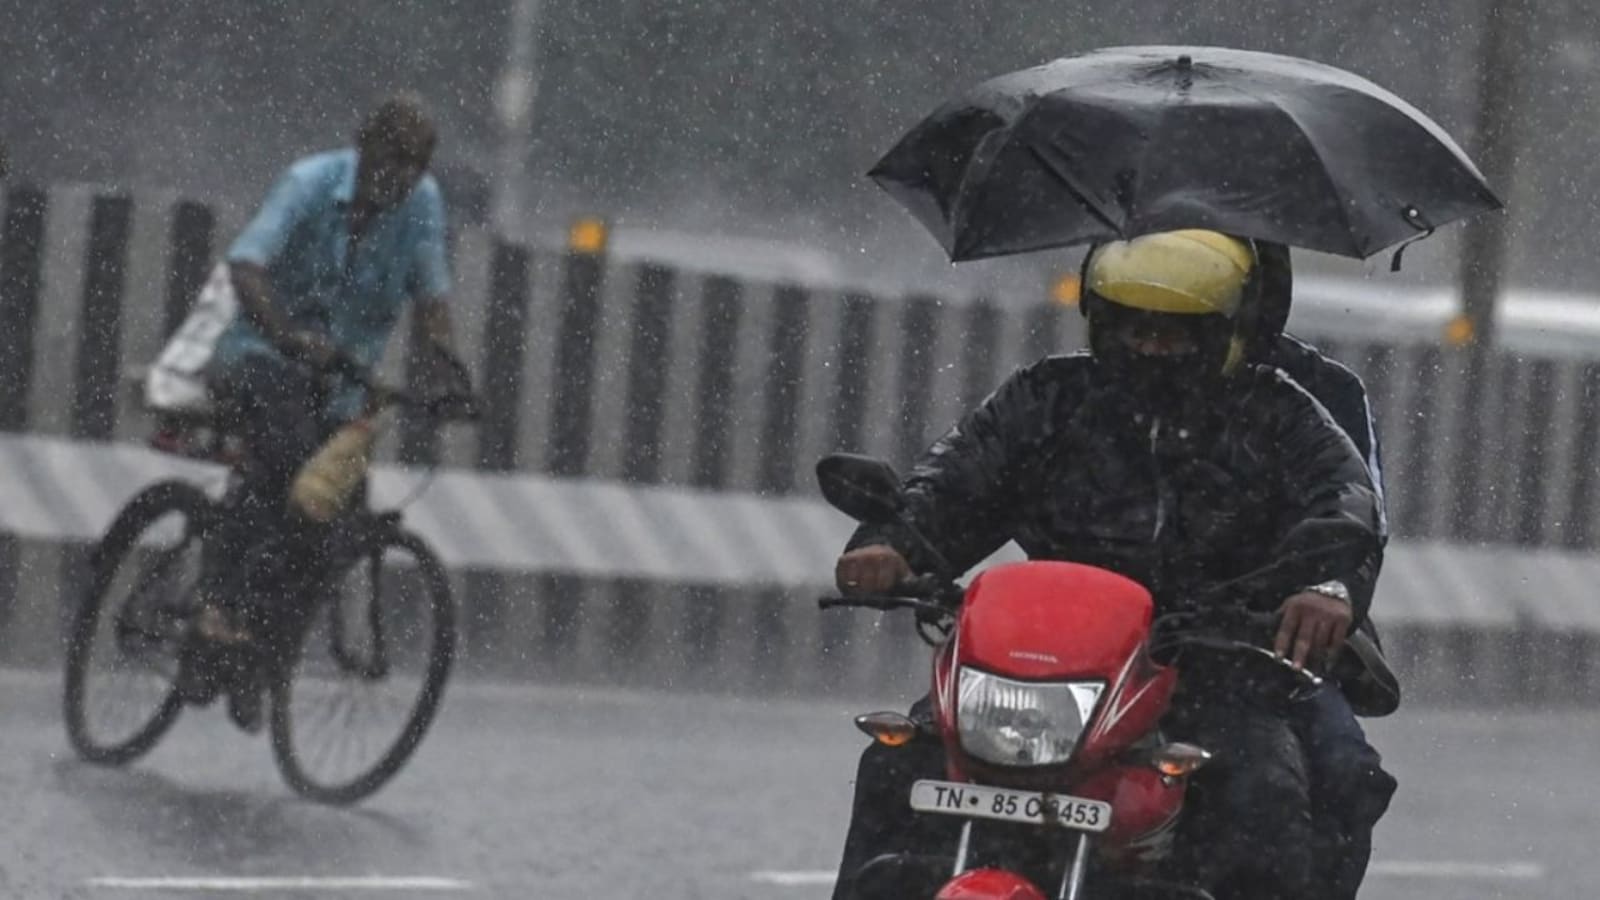 India on track for lowest monsoon rains in 8 years: Report